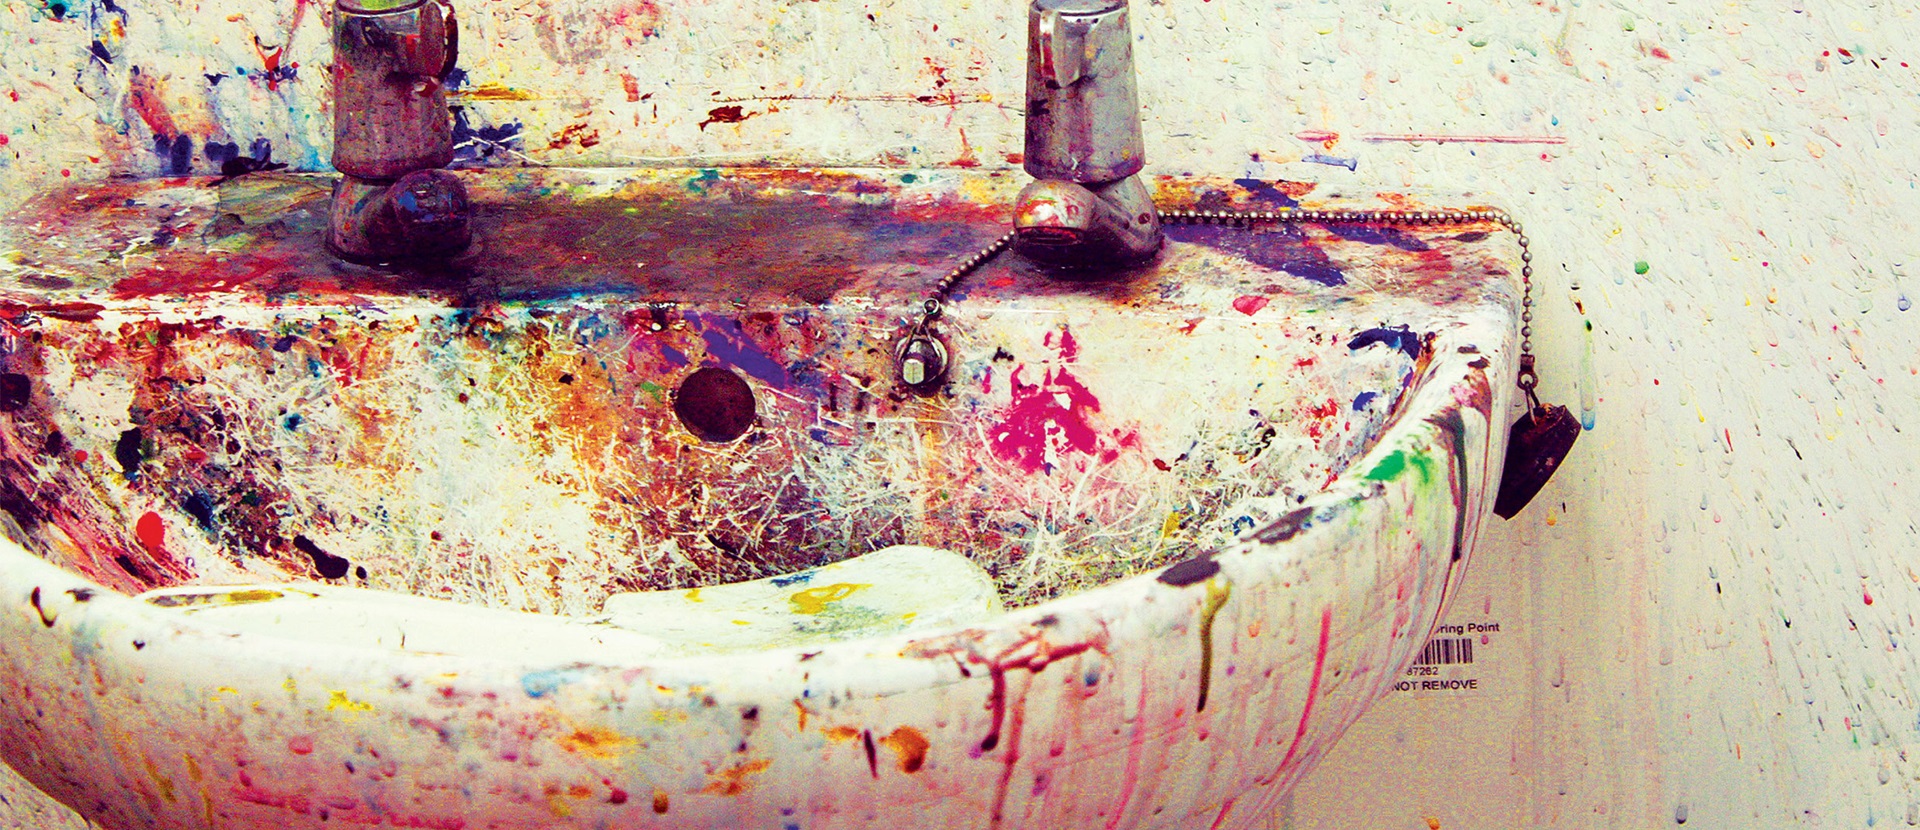 A sink with paint